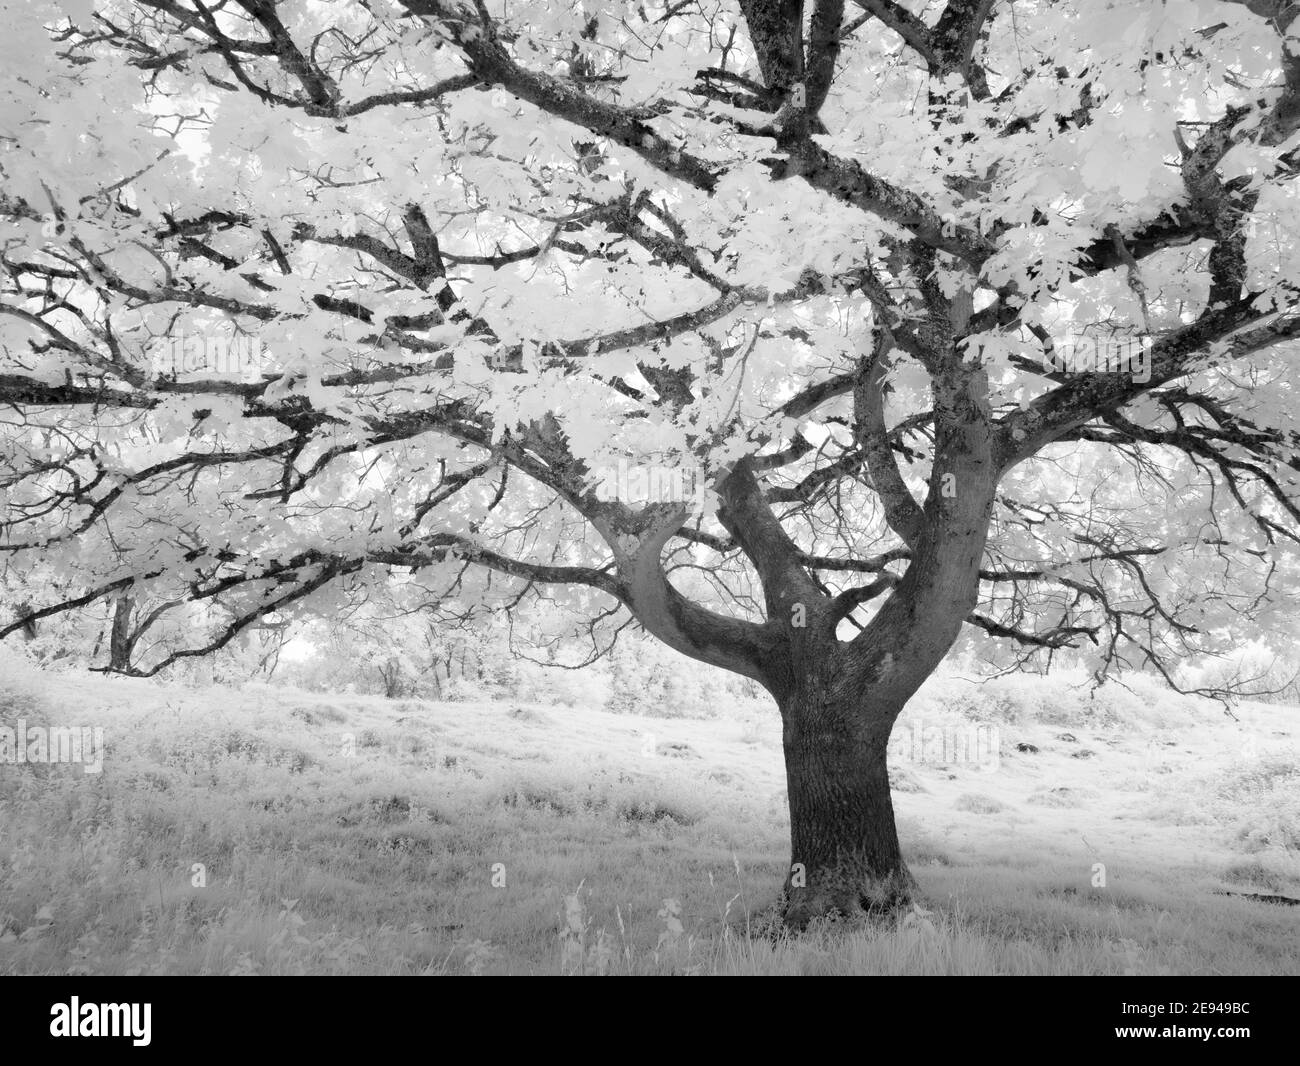 An infrared image of the foliage on an oak tree in summer. Stock Photo